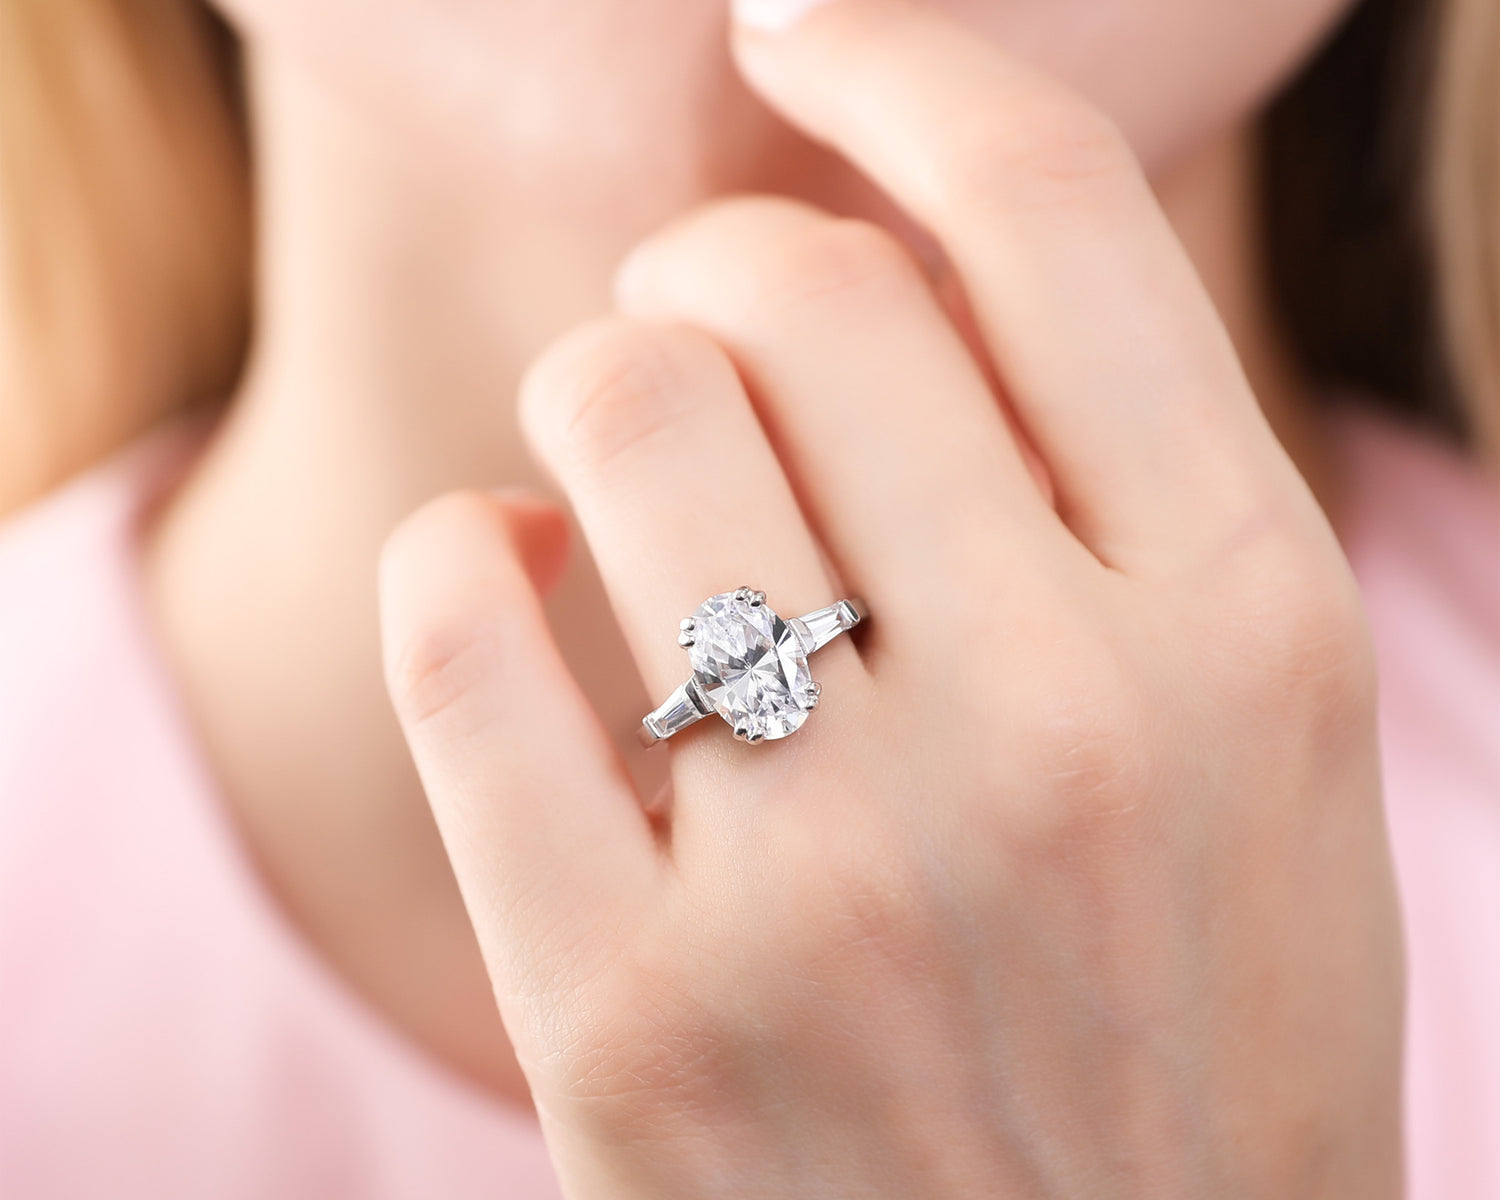 Top 5 Engagement Ring Cuts